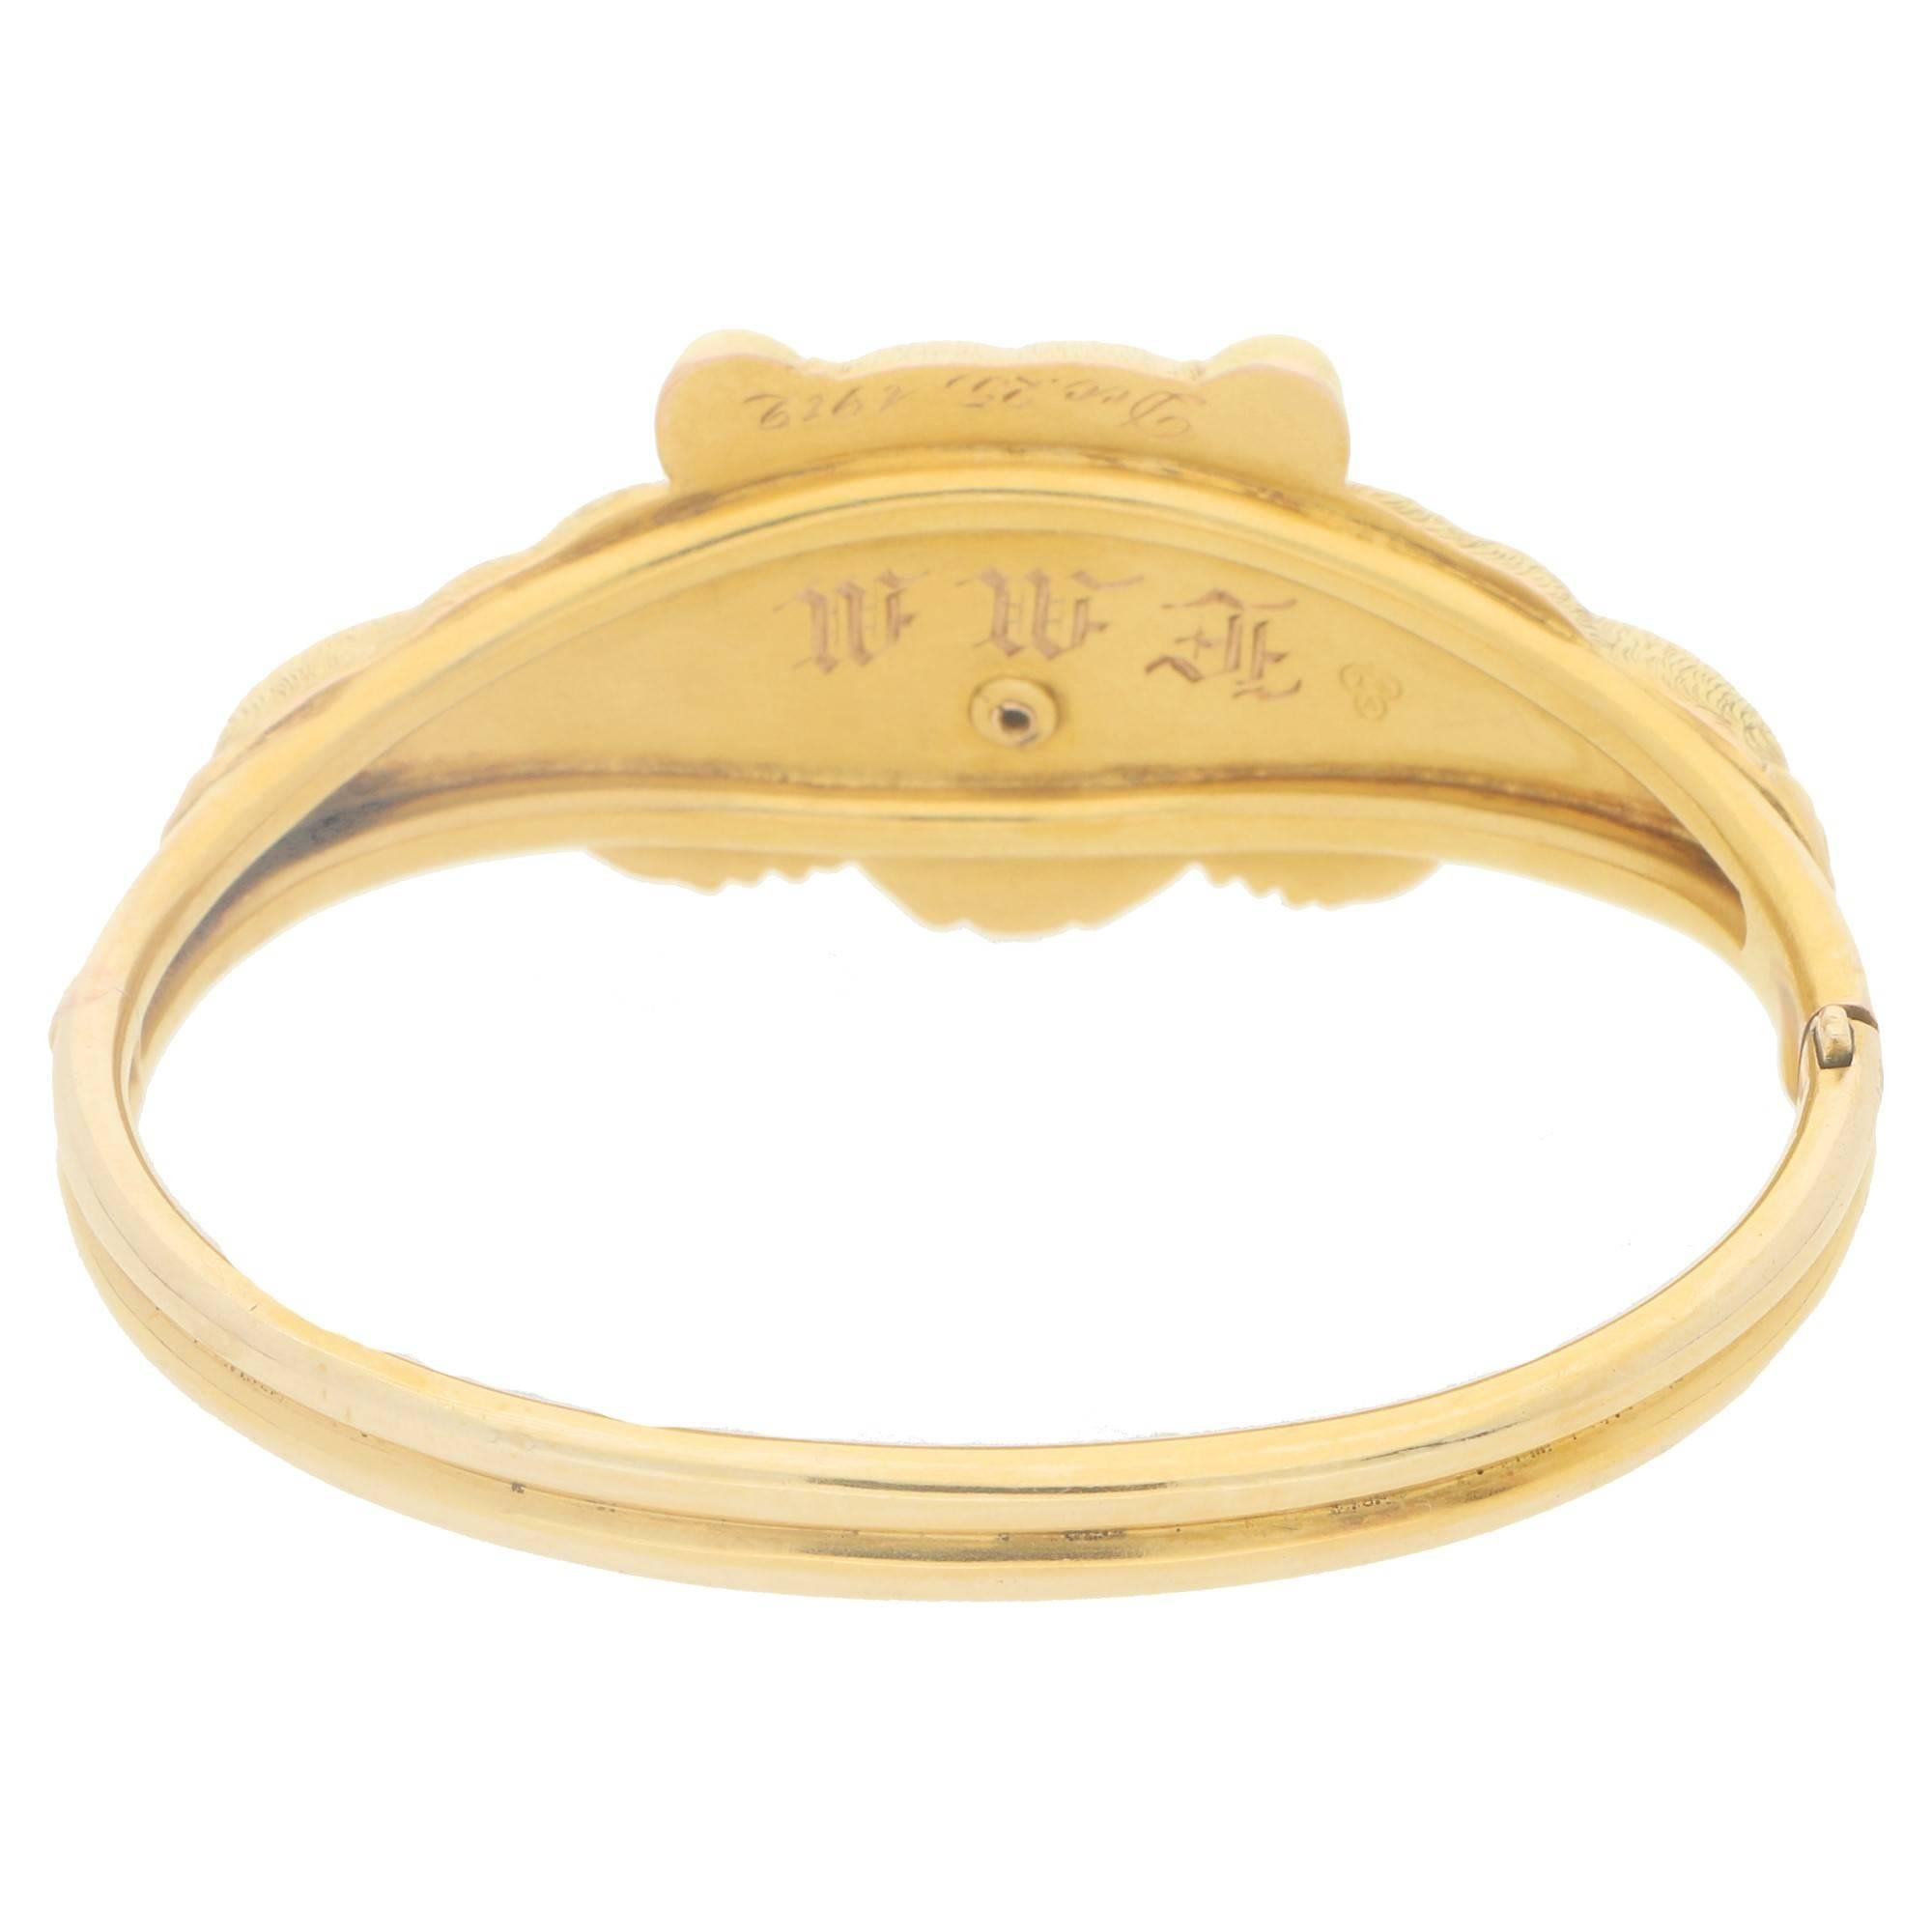 A turn of the century lifelike bear bear bangle. The bangle is formed of a central motif of a bear laying down head on. The hand carved fur detail is further embellished with round brilliant cut diamond eye and mouth detail. The underside of the